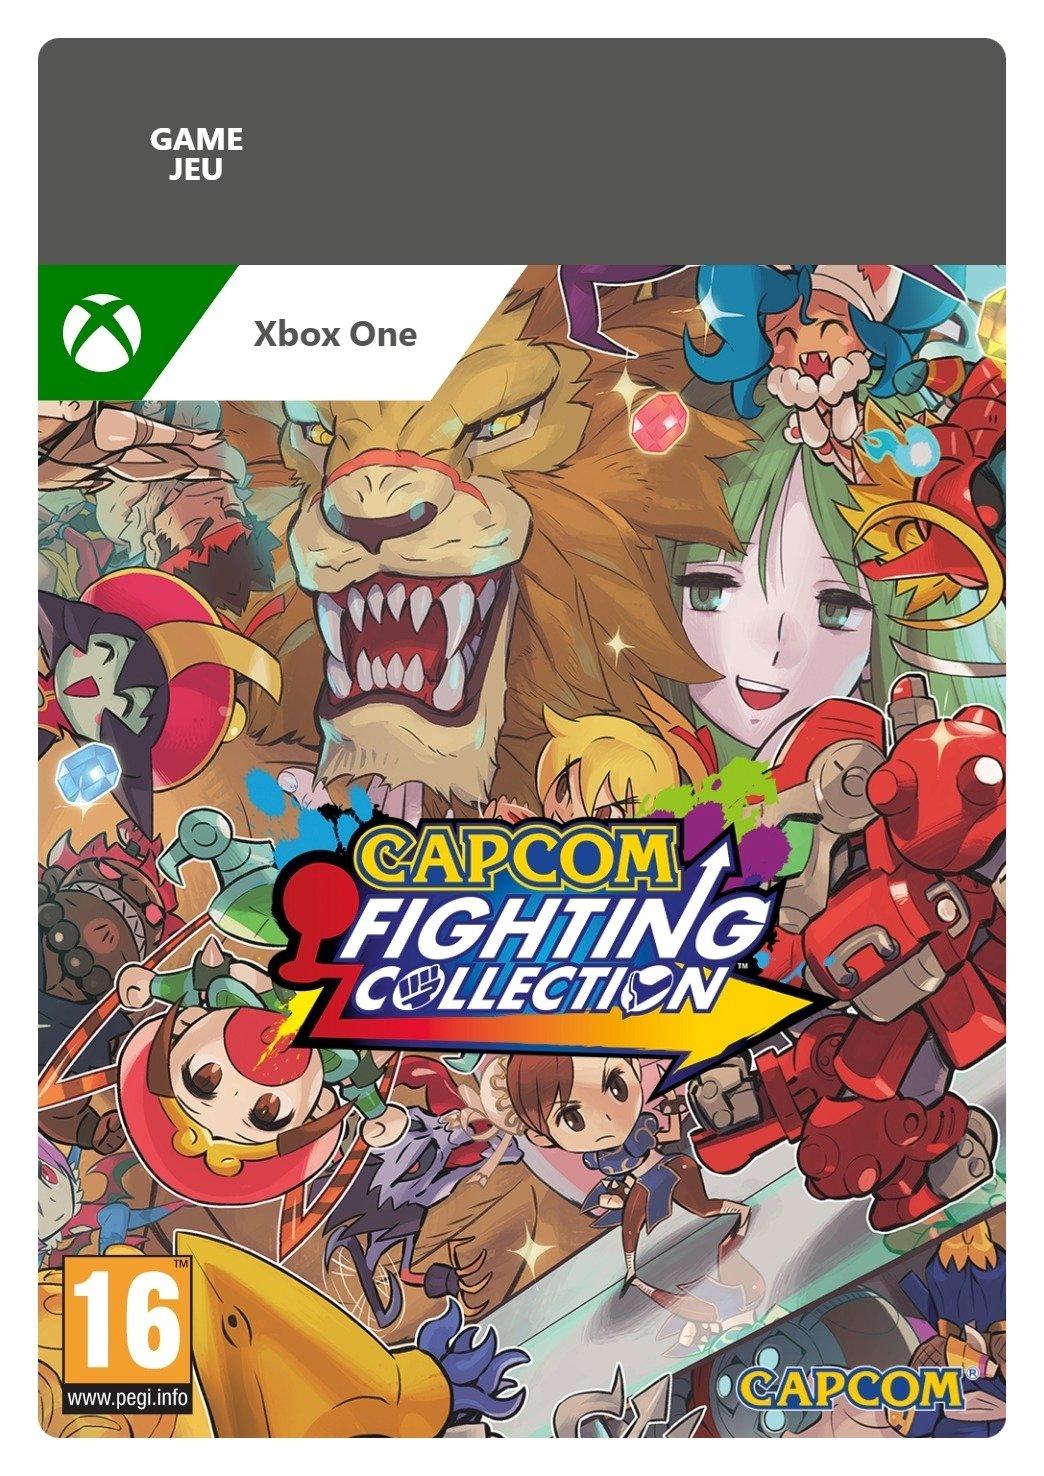 Capcom Fighting Collection - Xbox One - Game | G3Q-01369 (39f17570-947d-9543-8d5c-114f635c9ba9)